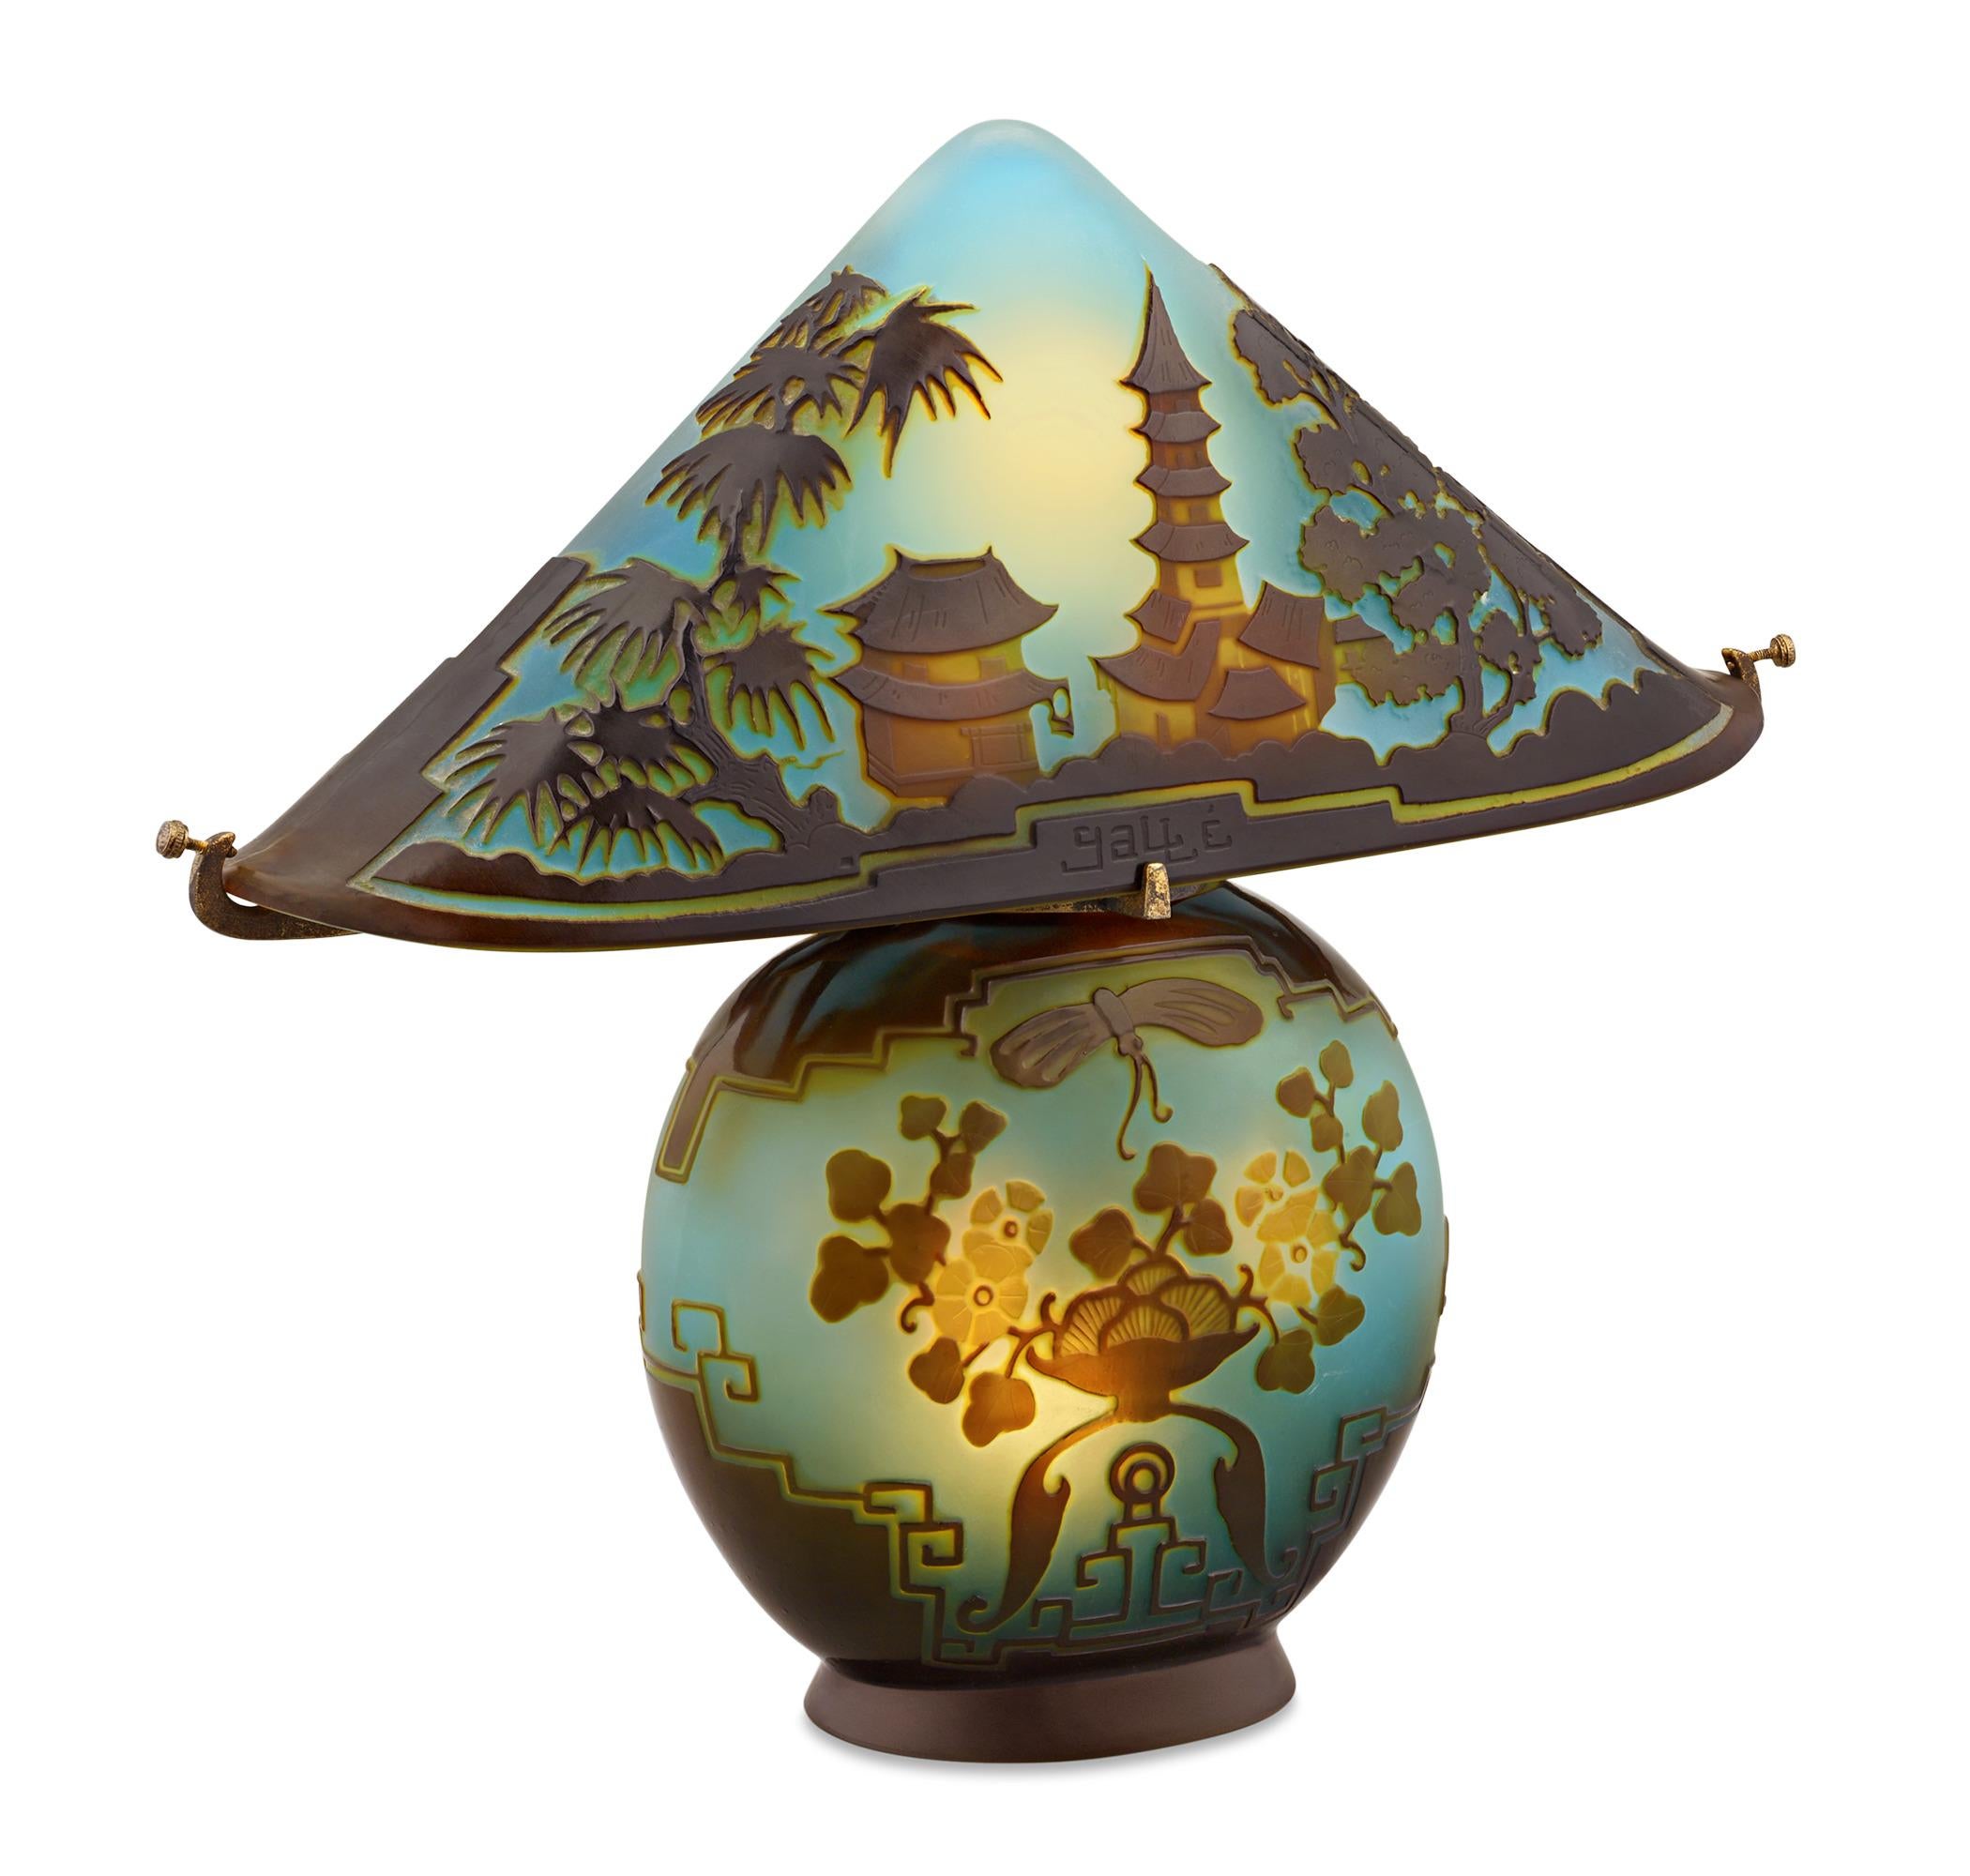 This Pagoda Cameo glass lamp is a highly rare and coveted example of Émile Gallé's mastery of glassmaking. Layers of vibrant color, from golden yellows to mauve, radiate from a background of elegantly frosted blue-green glass to form the scene of an